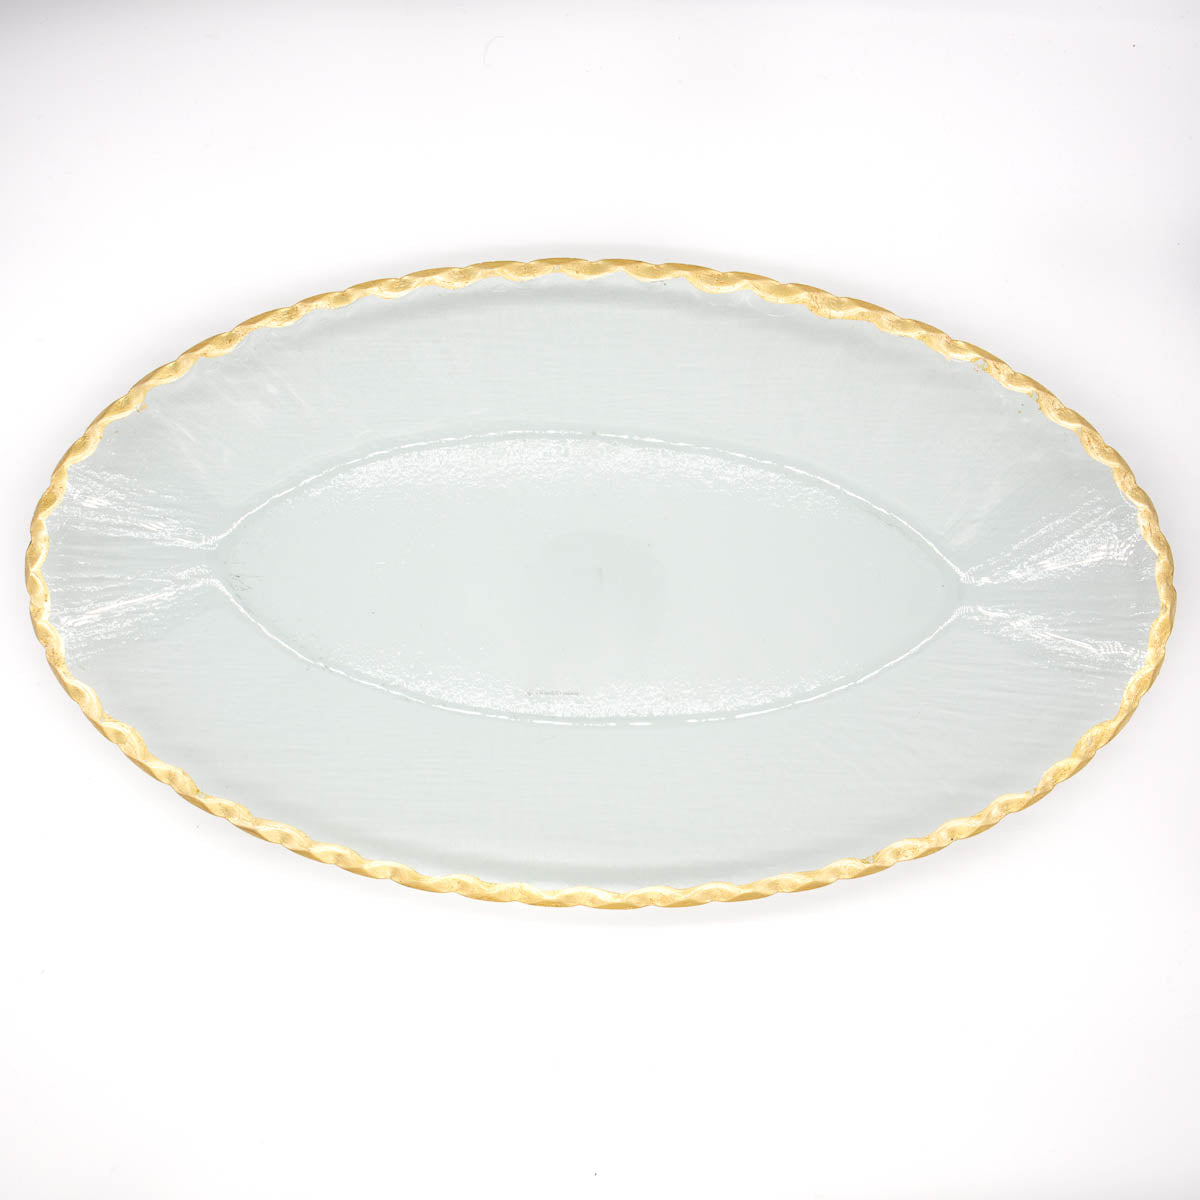 Cordova Oval Serving Tray Large